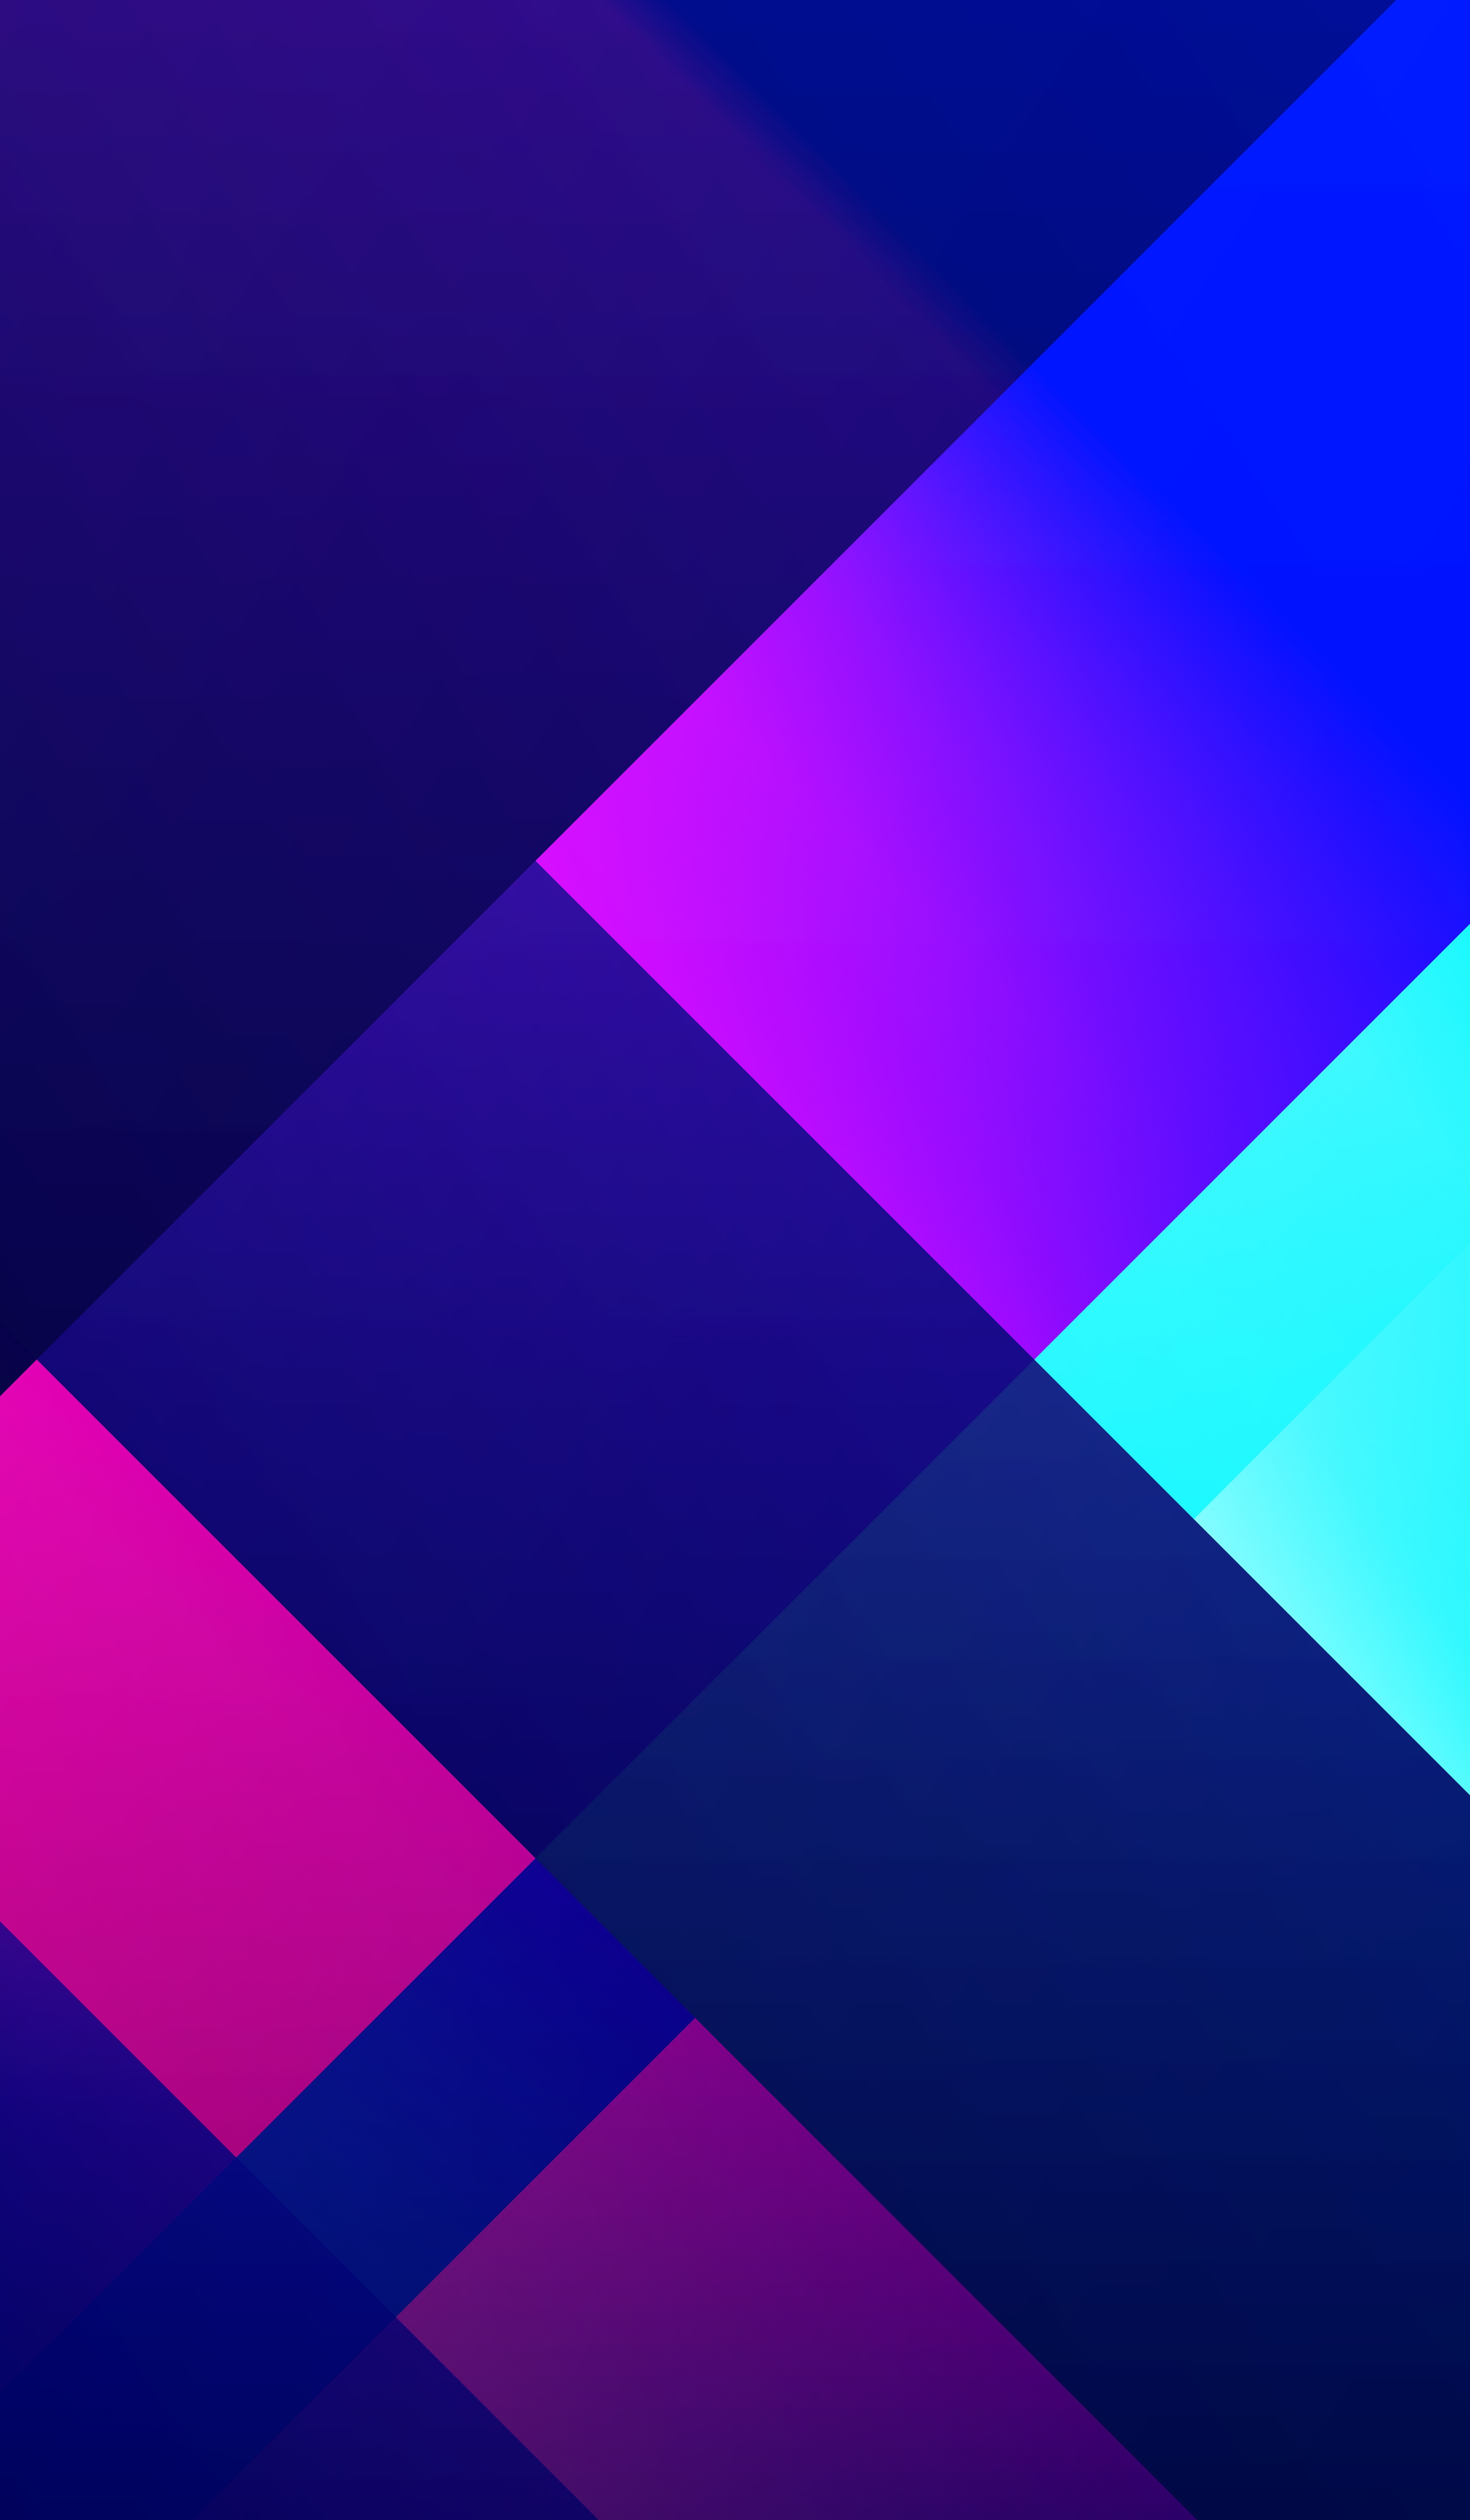 geometry, motley, gradient, abstract, multicolored images